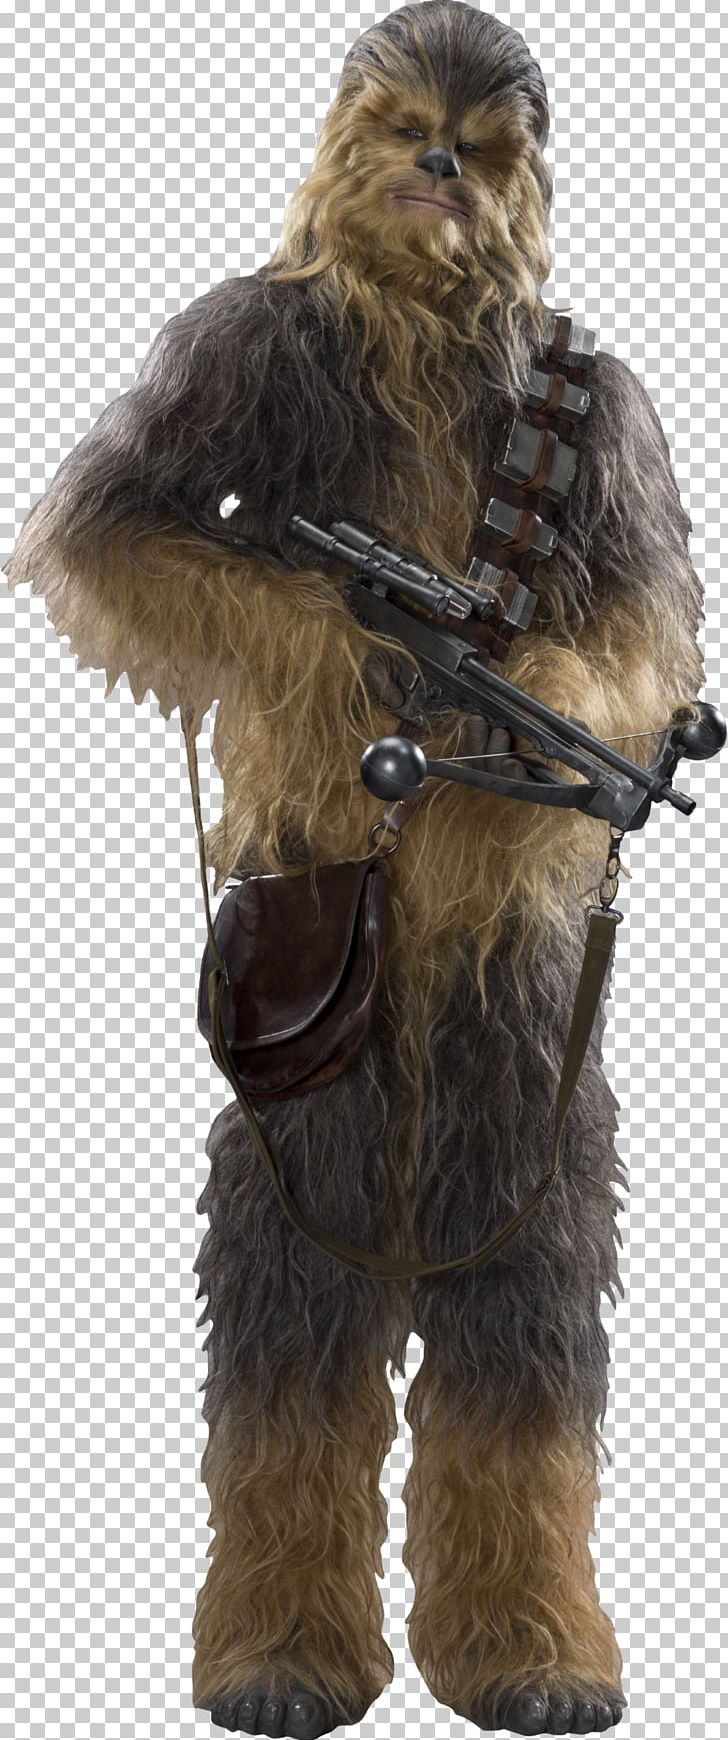 Chewbacca Han Solo Kylo Ren Star Wars Sequel Trilogy PNG, Clipart, Character, Chewbacca, Costume, Empire Strikes Back, Fantasy Free PNG Download